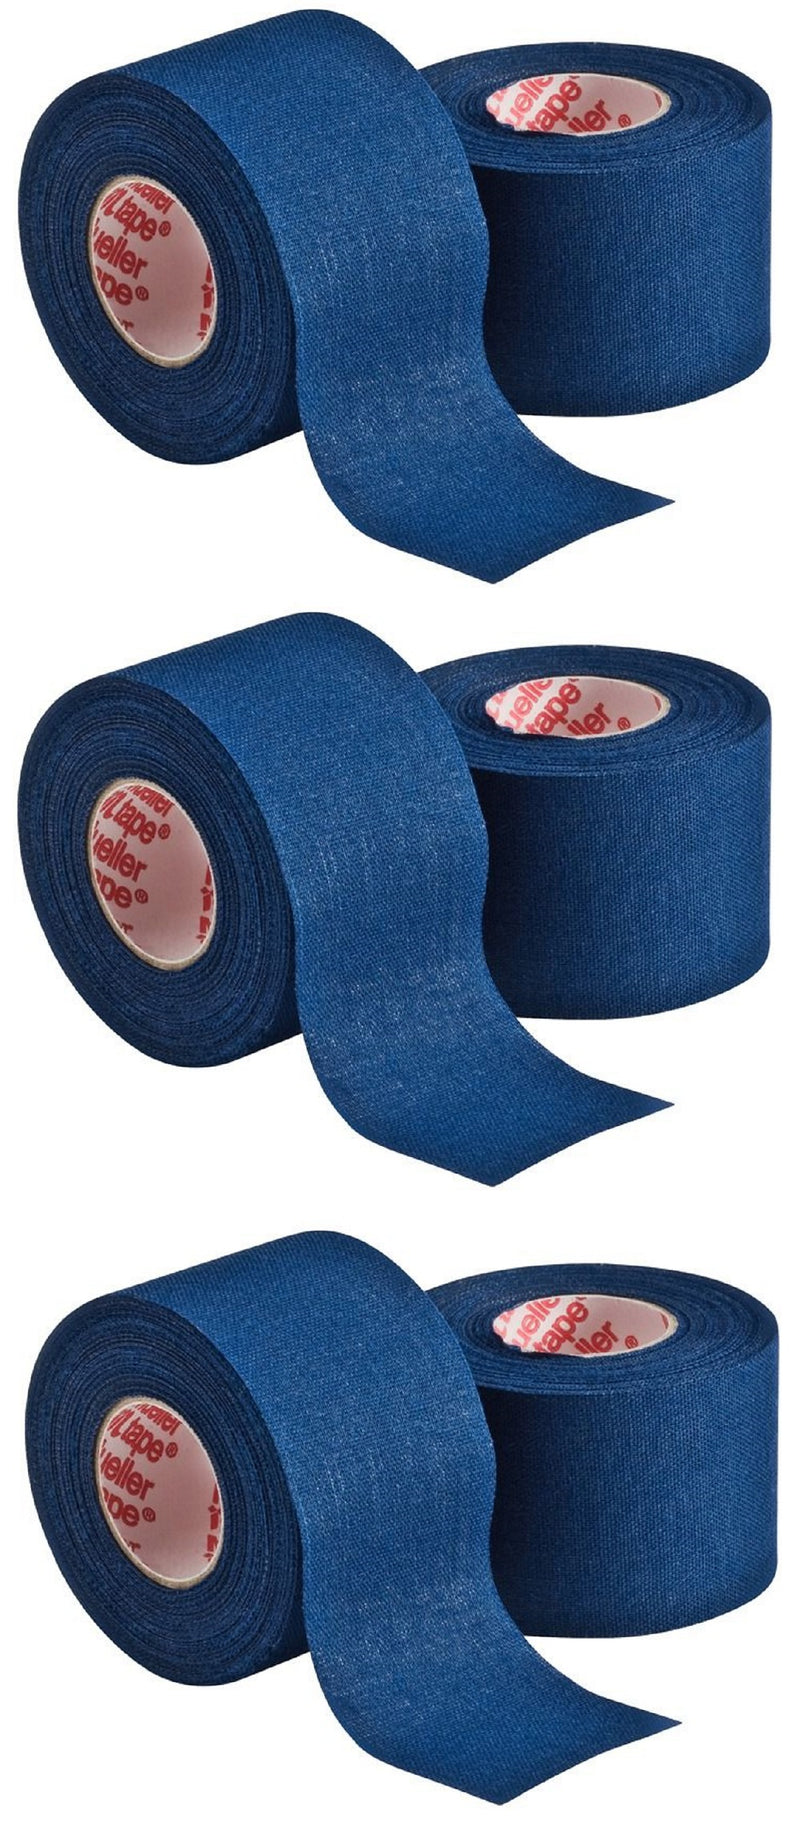 Cramer AT Pro Strong Athletic Tape, Adhesive Tape